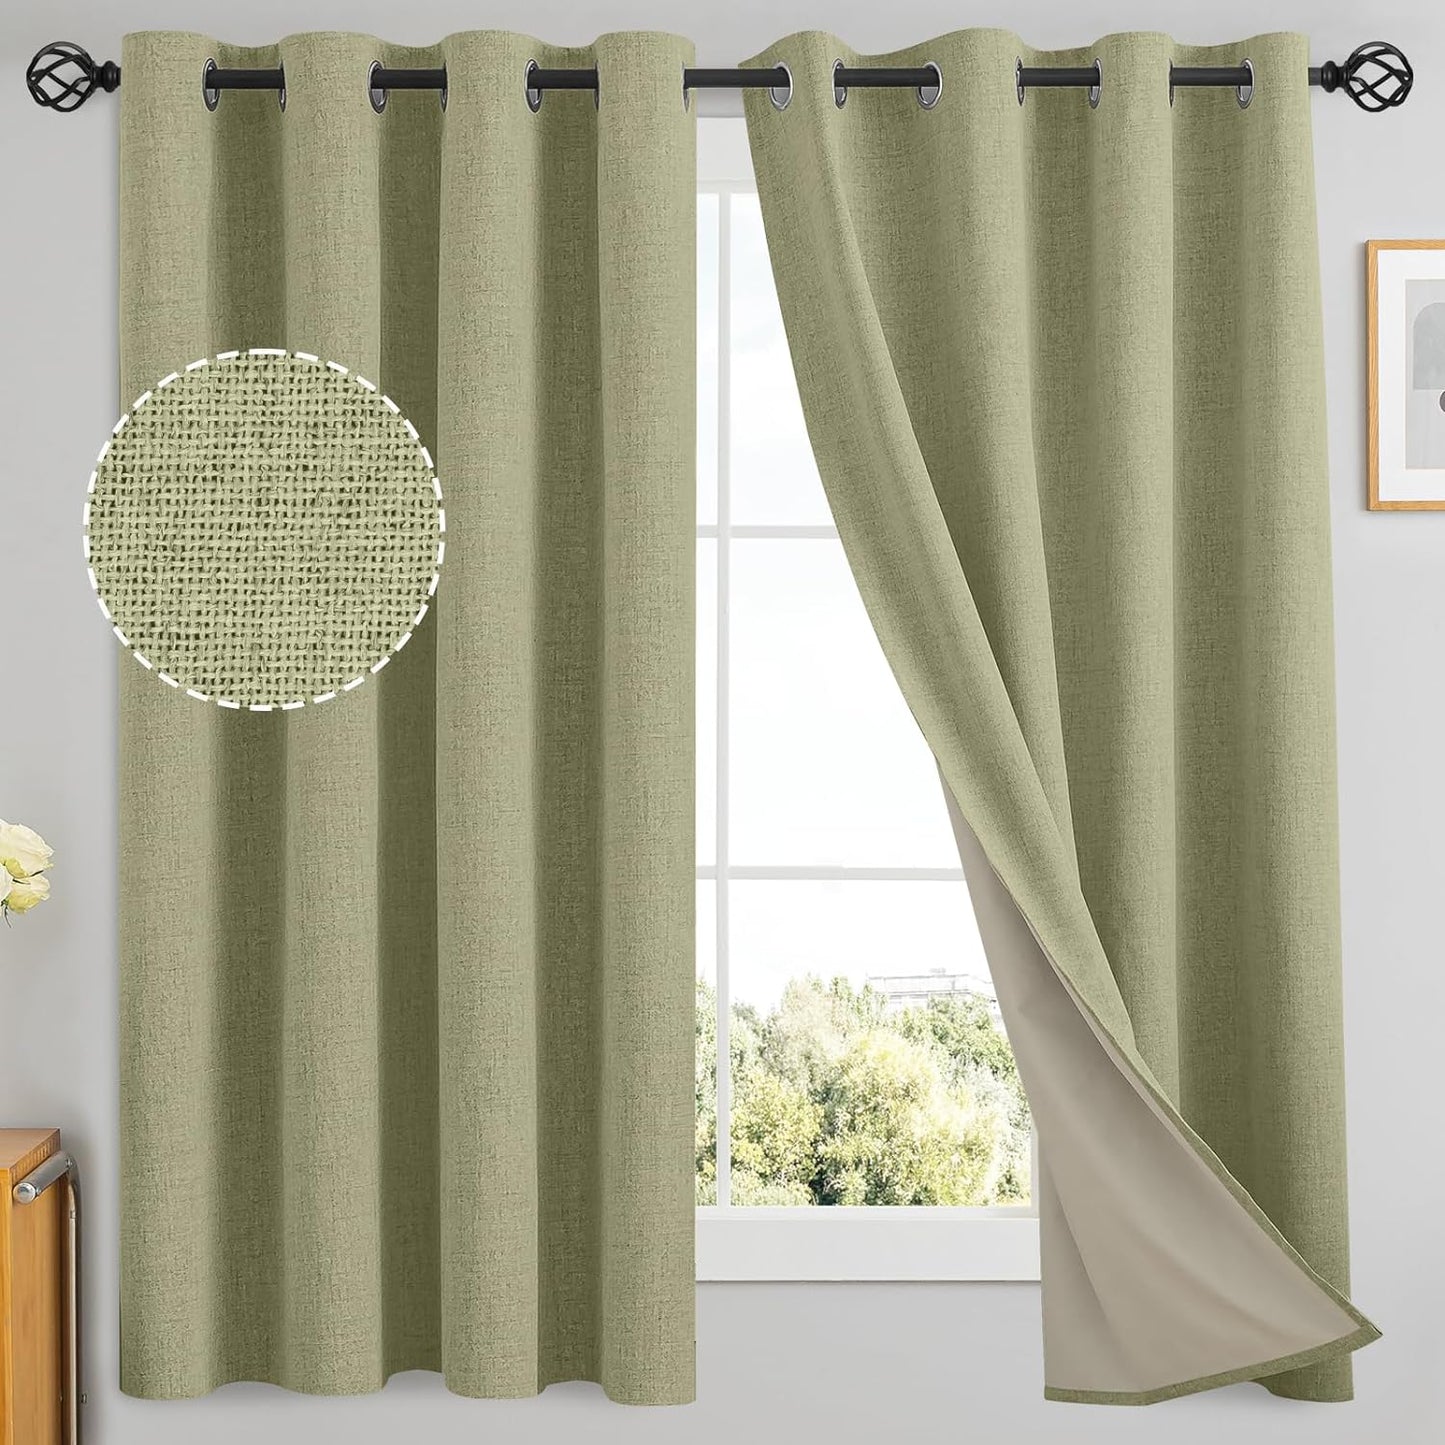 Yakamok Natural Linen Curtains 100% Blackout 84 Inches Long,Room Darkening Textured Curtains for Living Room Thermal Grommet Bedroom Curtains 2 Panels with Greyish White Liner  Yakamok Sage Green 52W X 63L / 2 Panels 